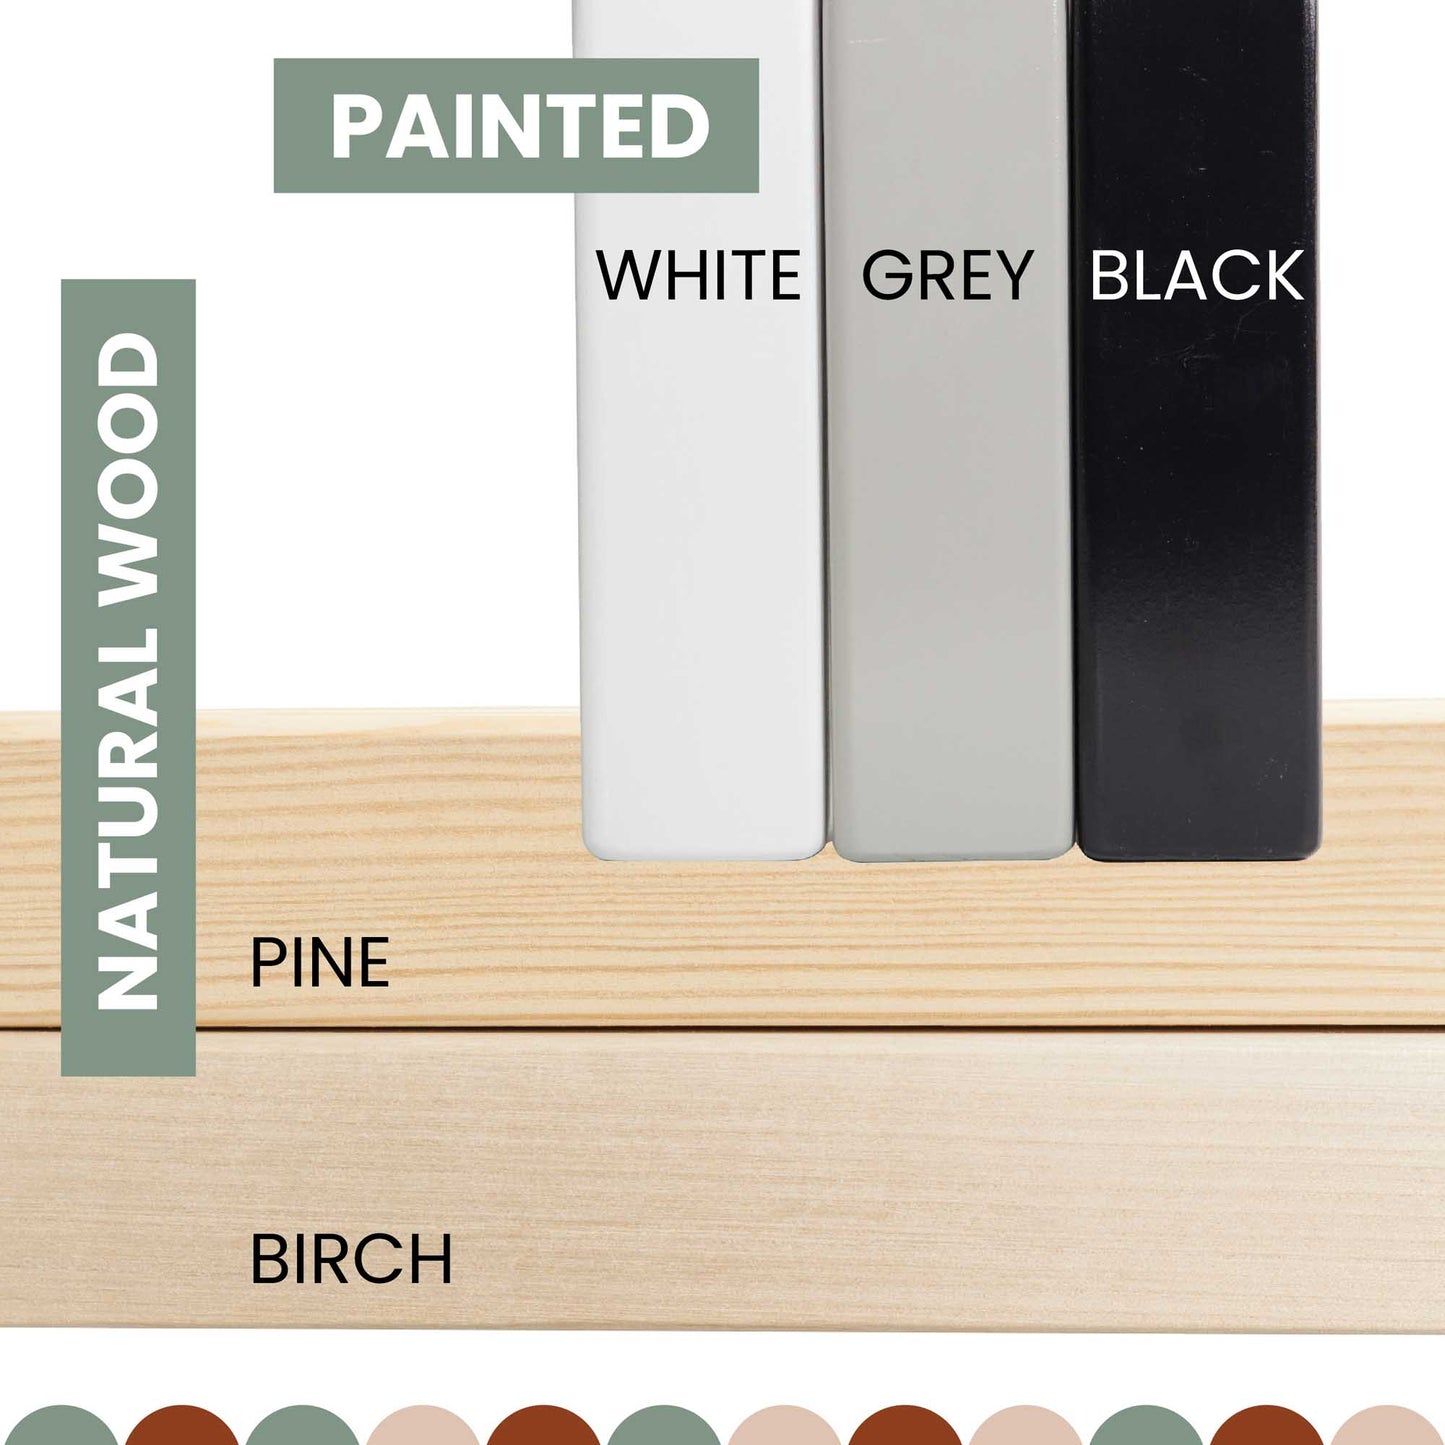 The paint colors for the Sweet Home From Wood Wooden zero-clearance house bed, creating a cozy sleep haven.